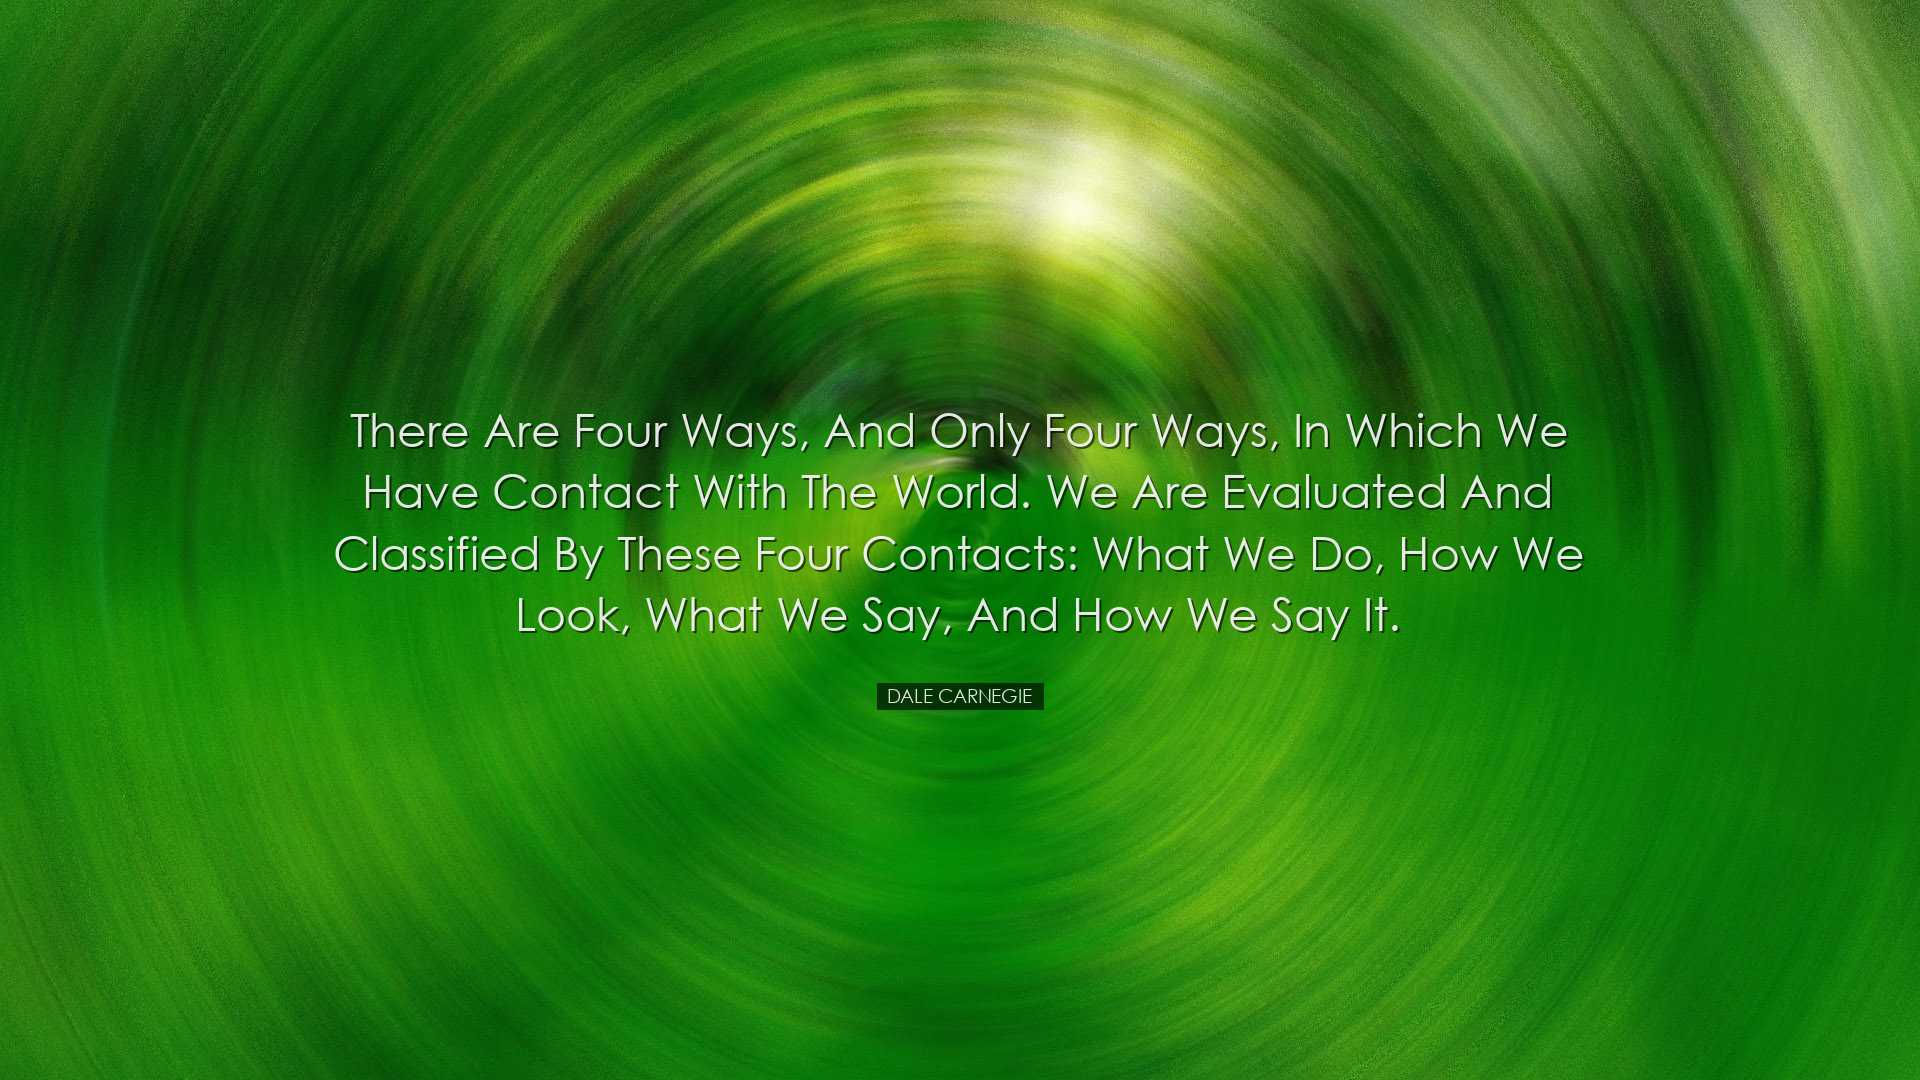 There are four ways, and only four ways, in which we have contact